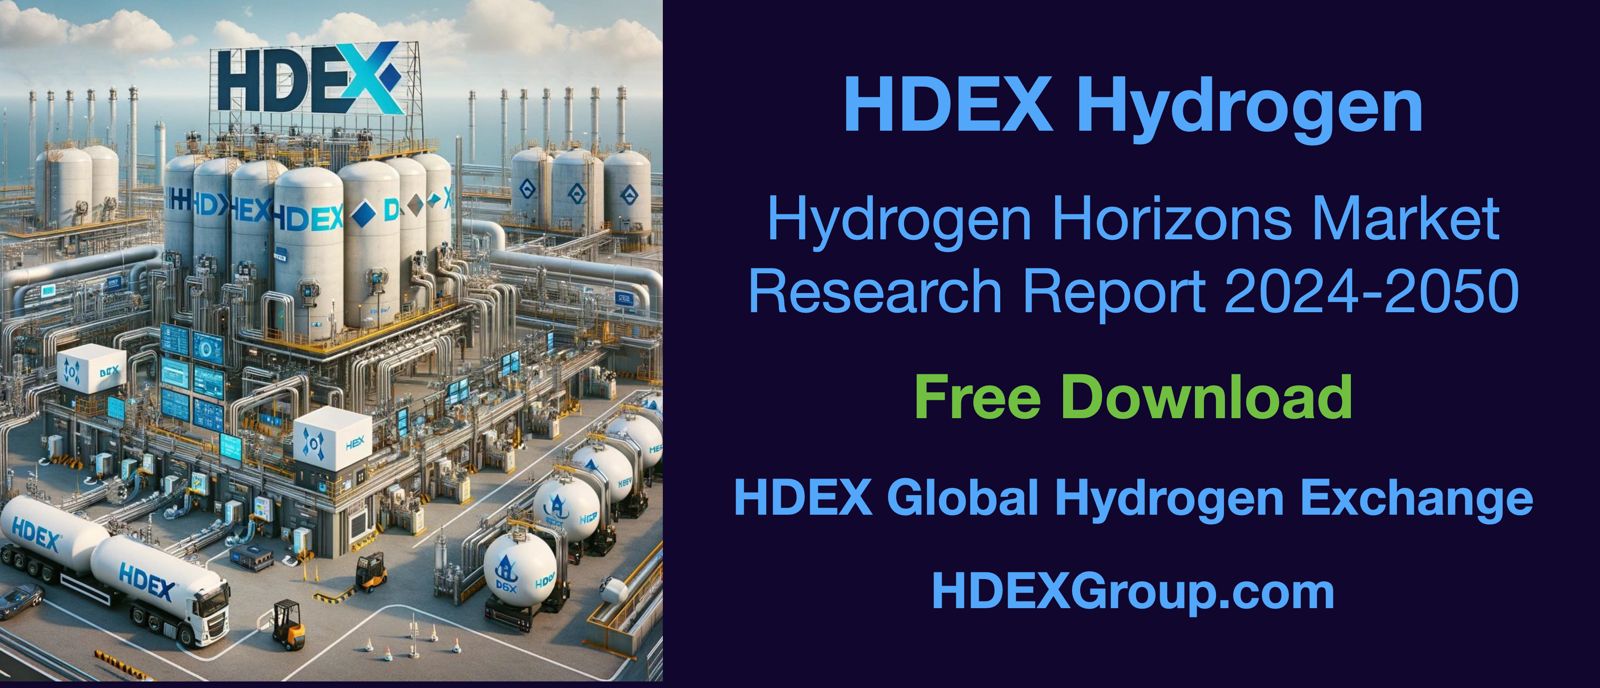 HDEX Publishes Market Report on Hydrogen Horizons from 2024 to 2050